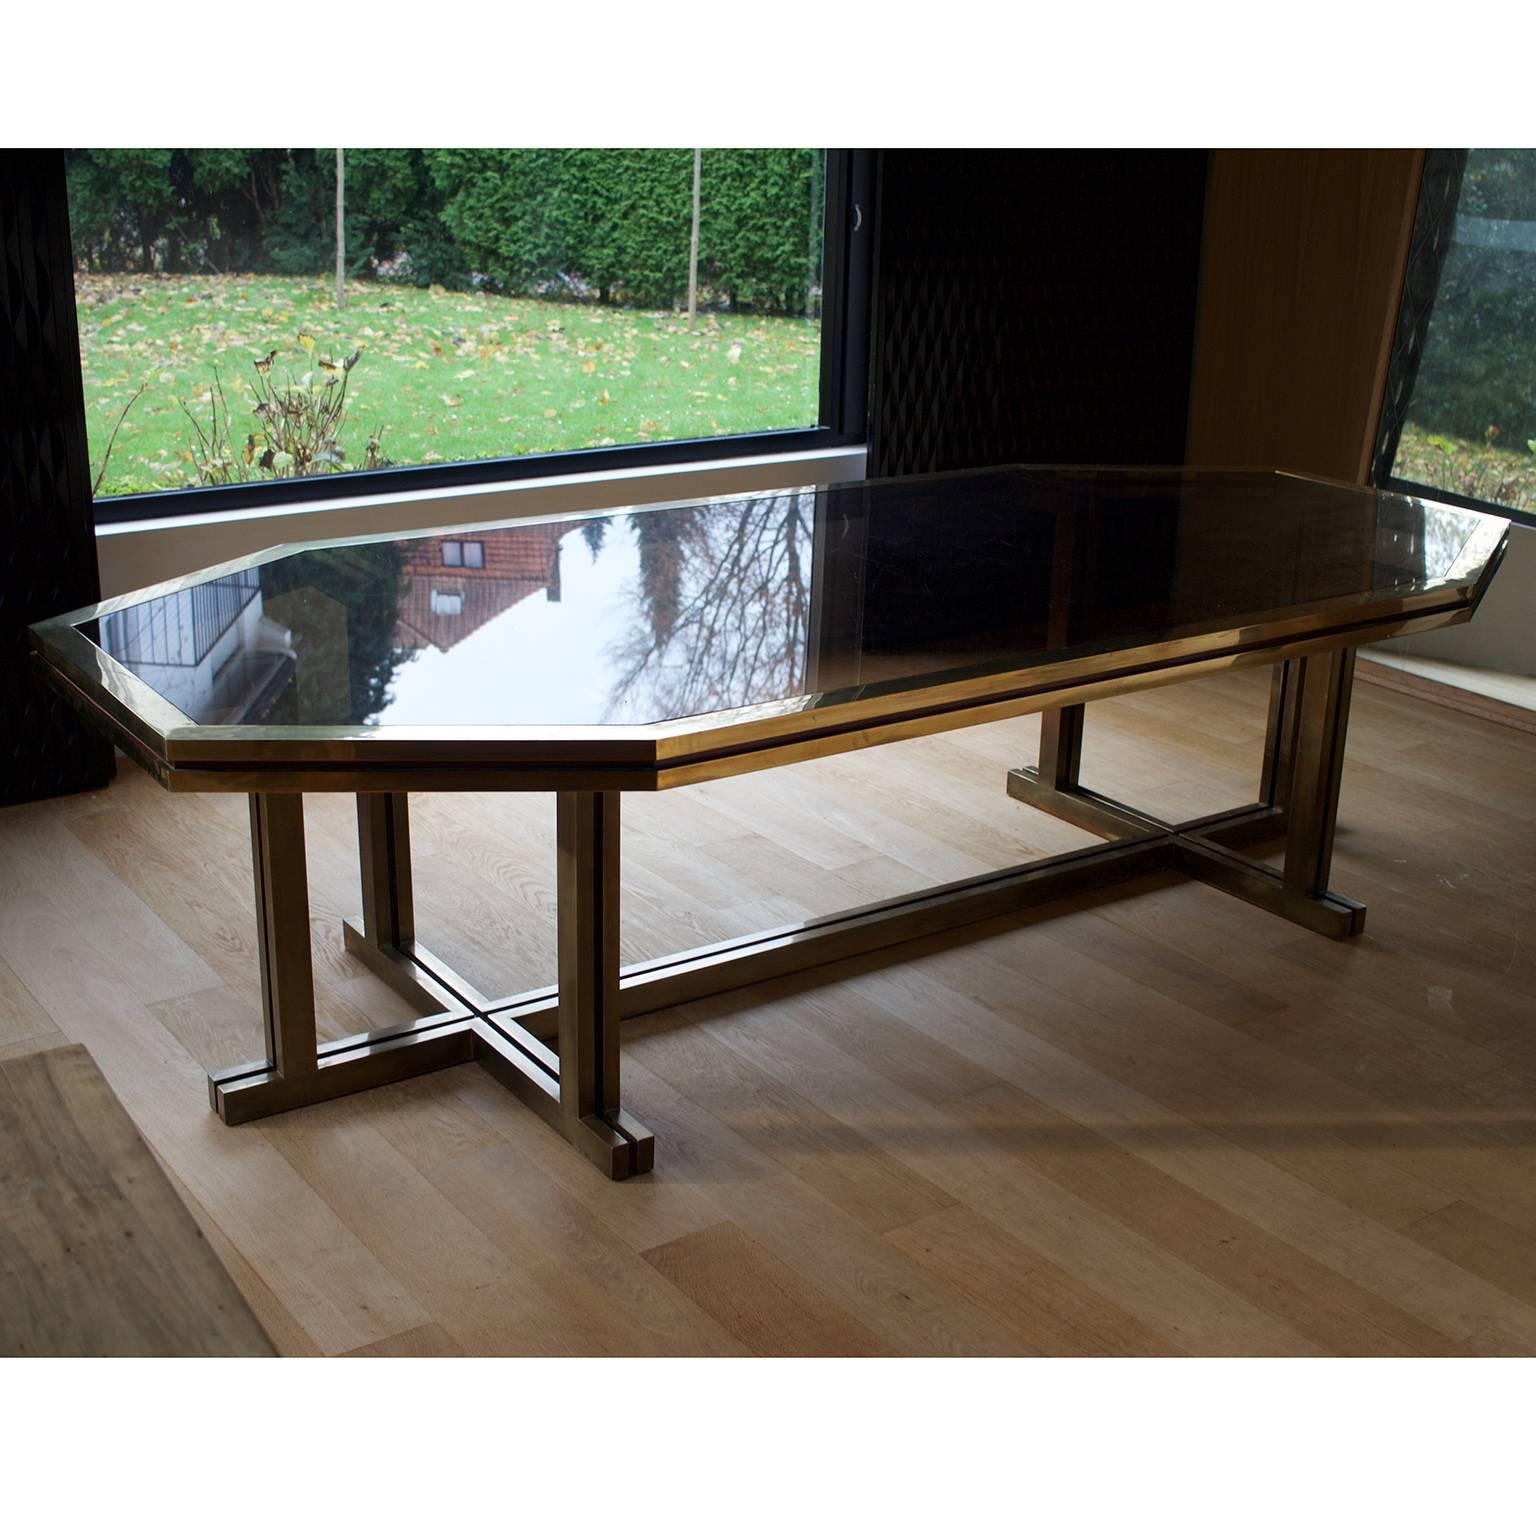 Brass and glass dining room table by Maison Jansen.

Brass structure with smoked glass tabletop.